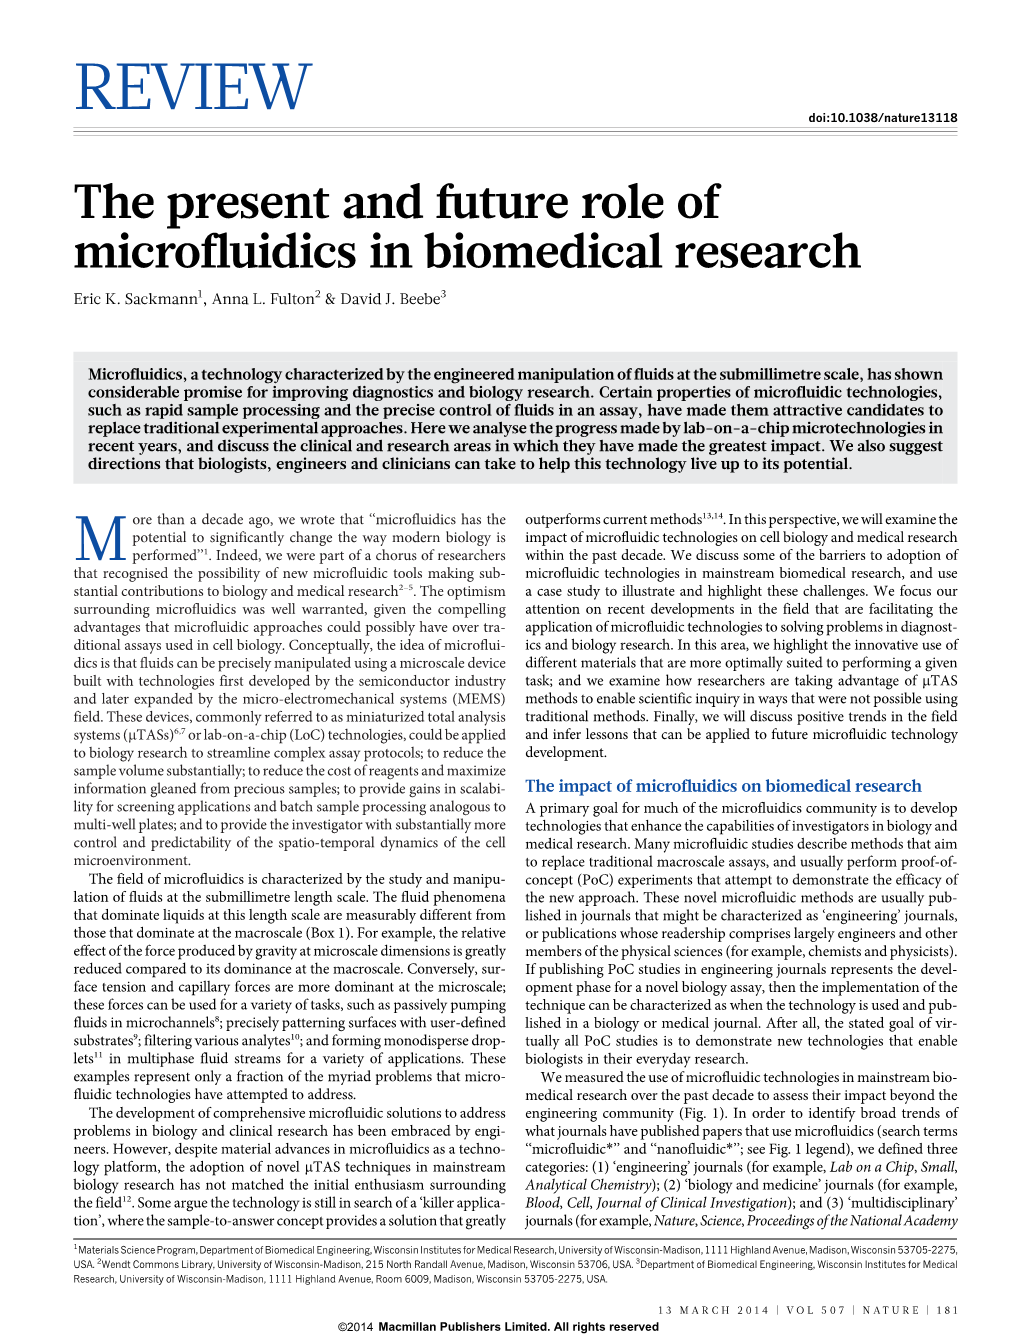 The Present and Future Role of Microfluidics in Biomedical Research Eric K